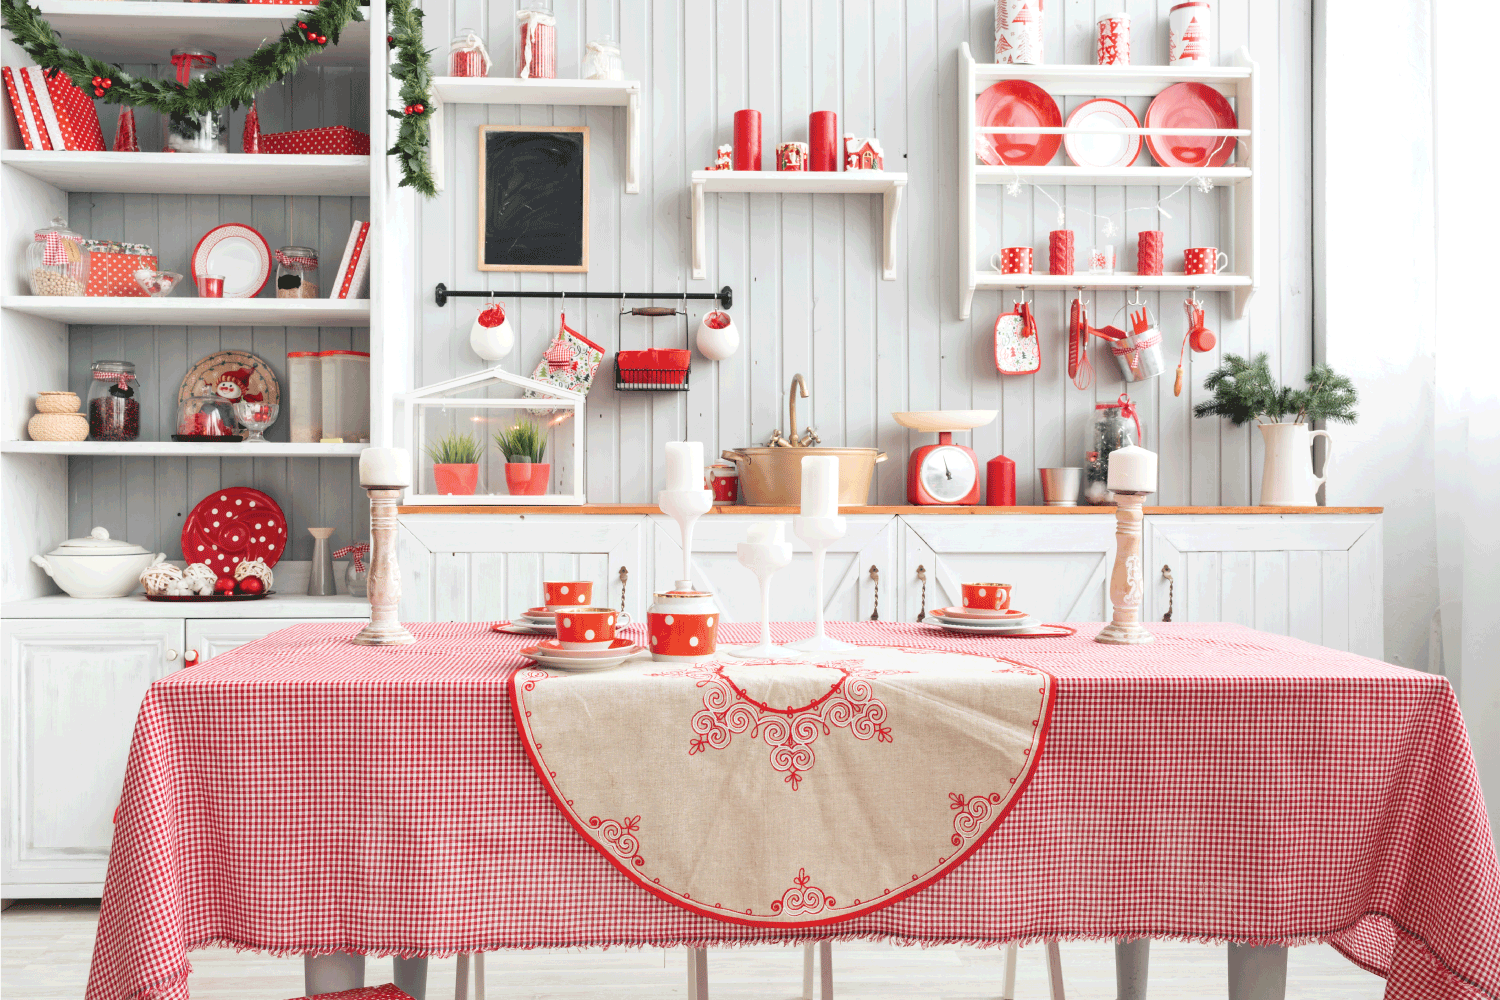 Interior light grey kitchen and red christmas decor. pink tablecloth with light flowy curtains on the windows.